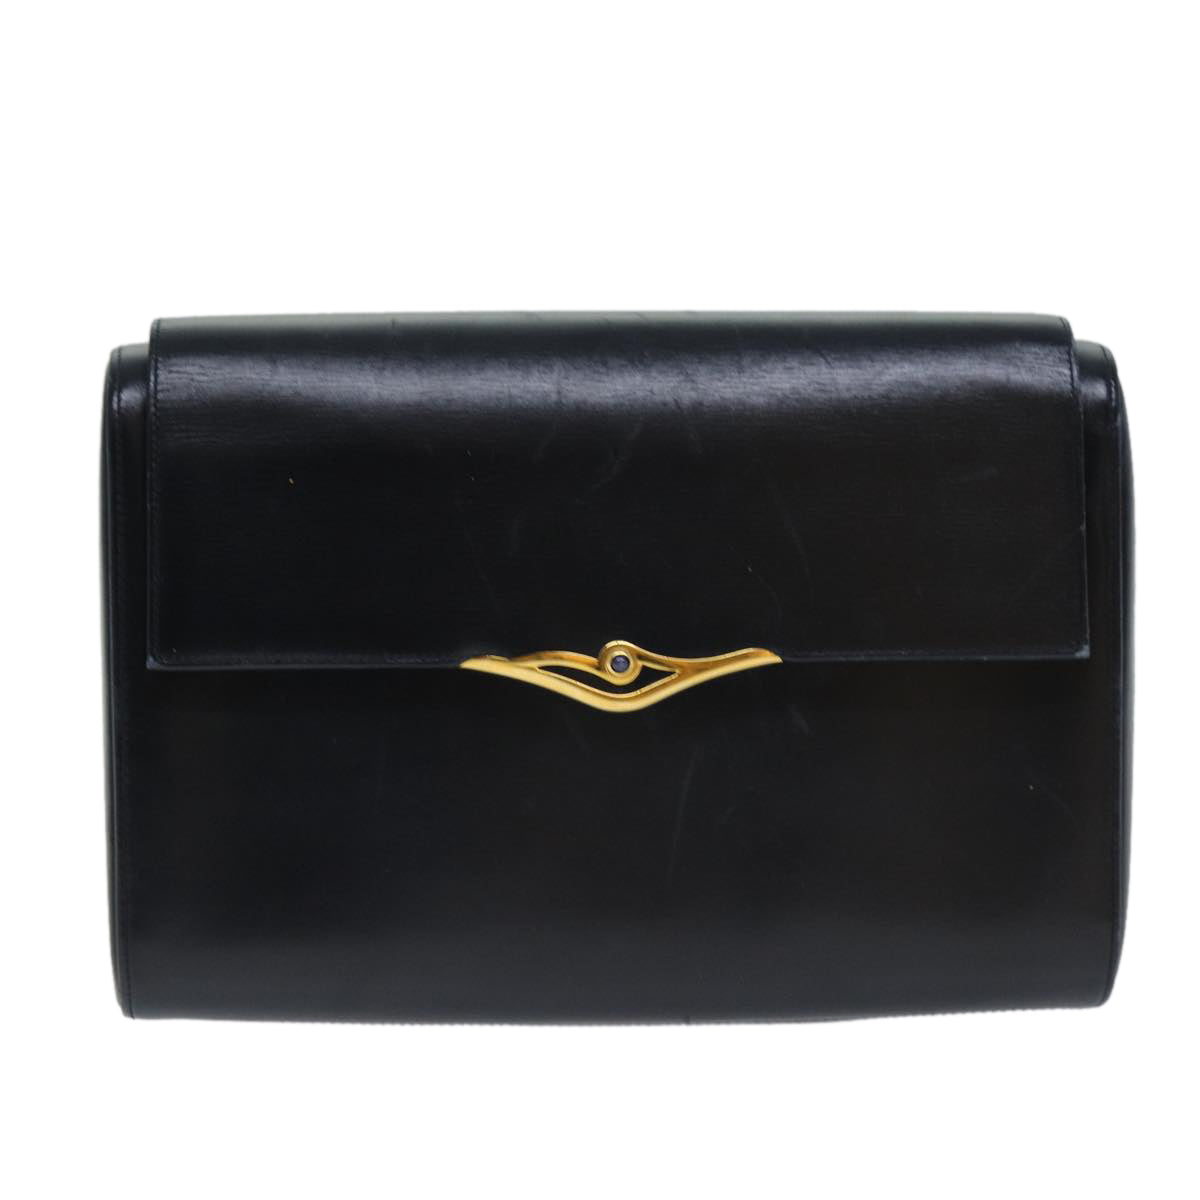 CARTIER Clutch Bag Leather Navy Auth am6295